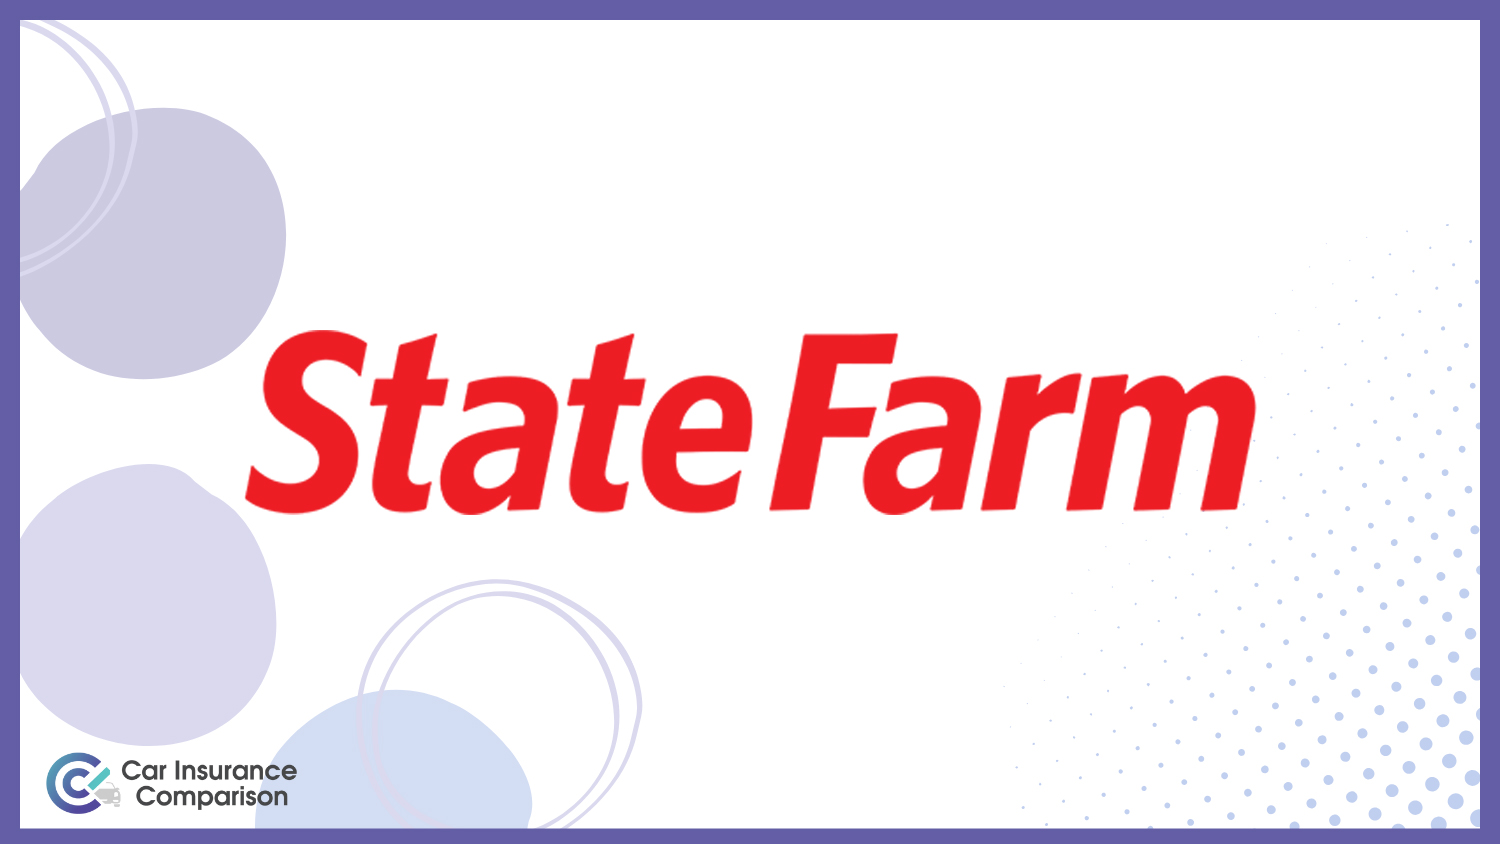 State Farm: Cheap Car Insurance for Older Vehicles